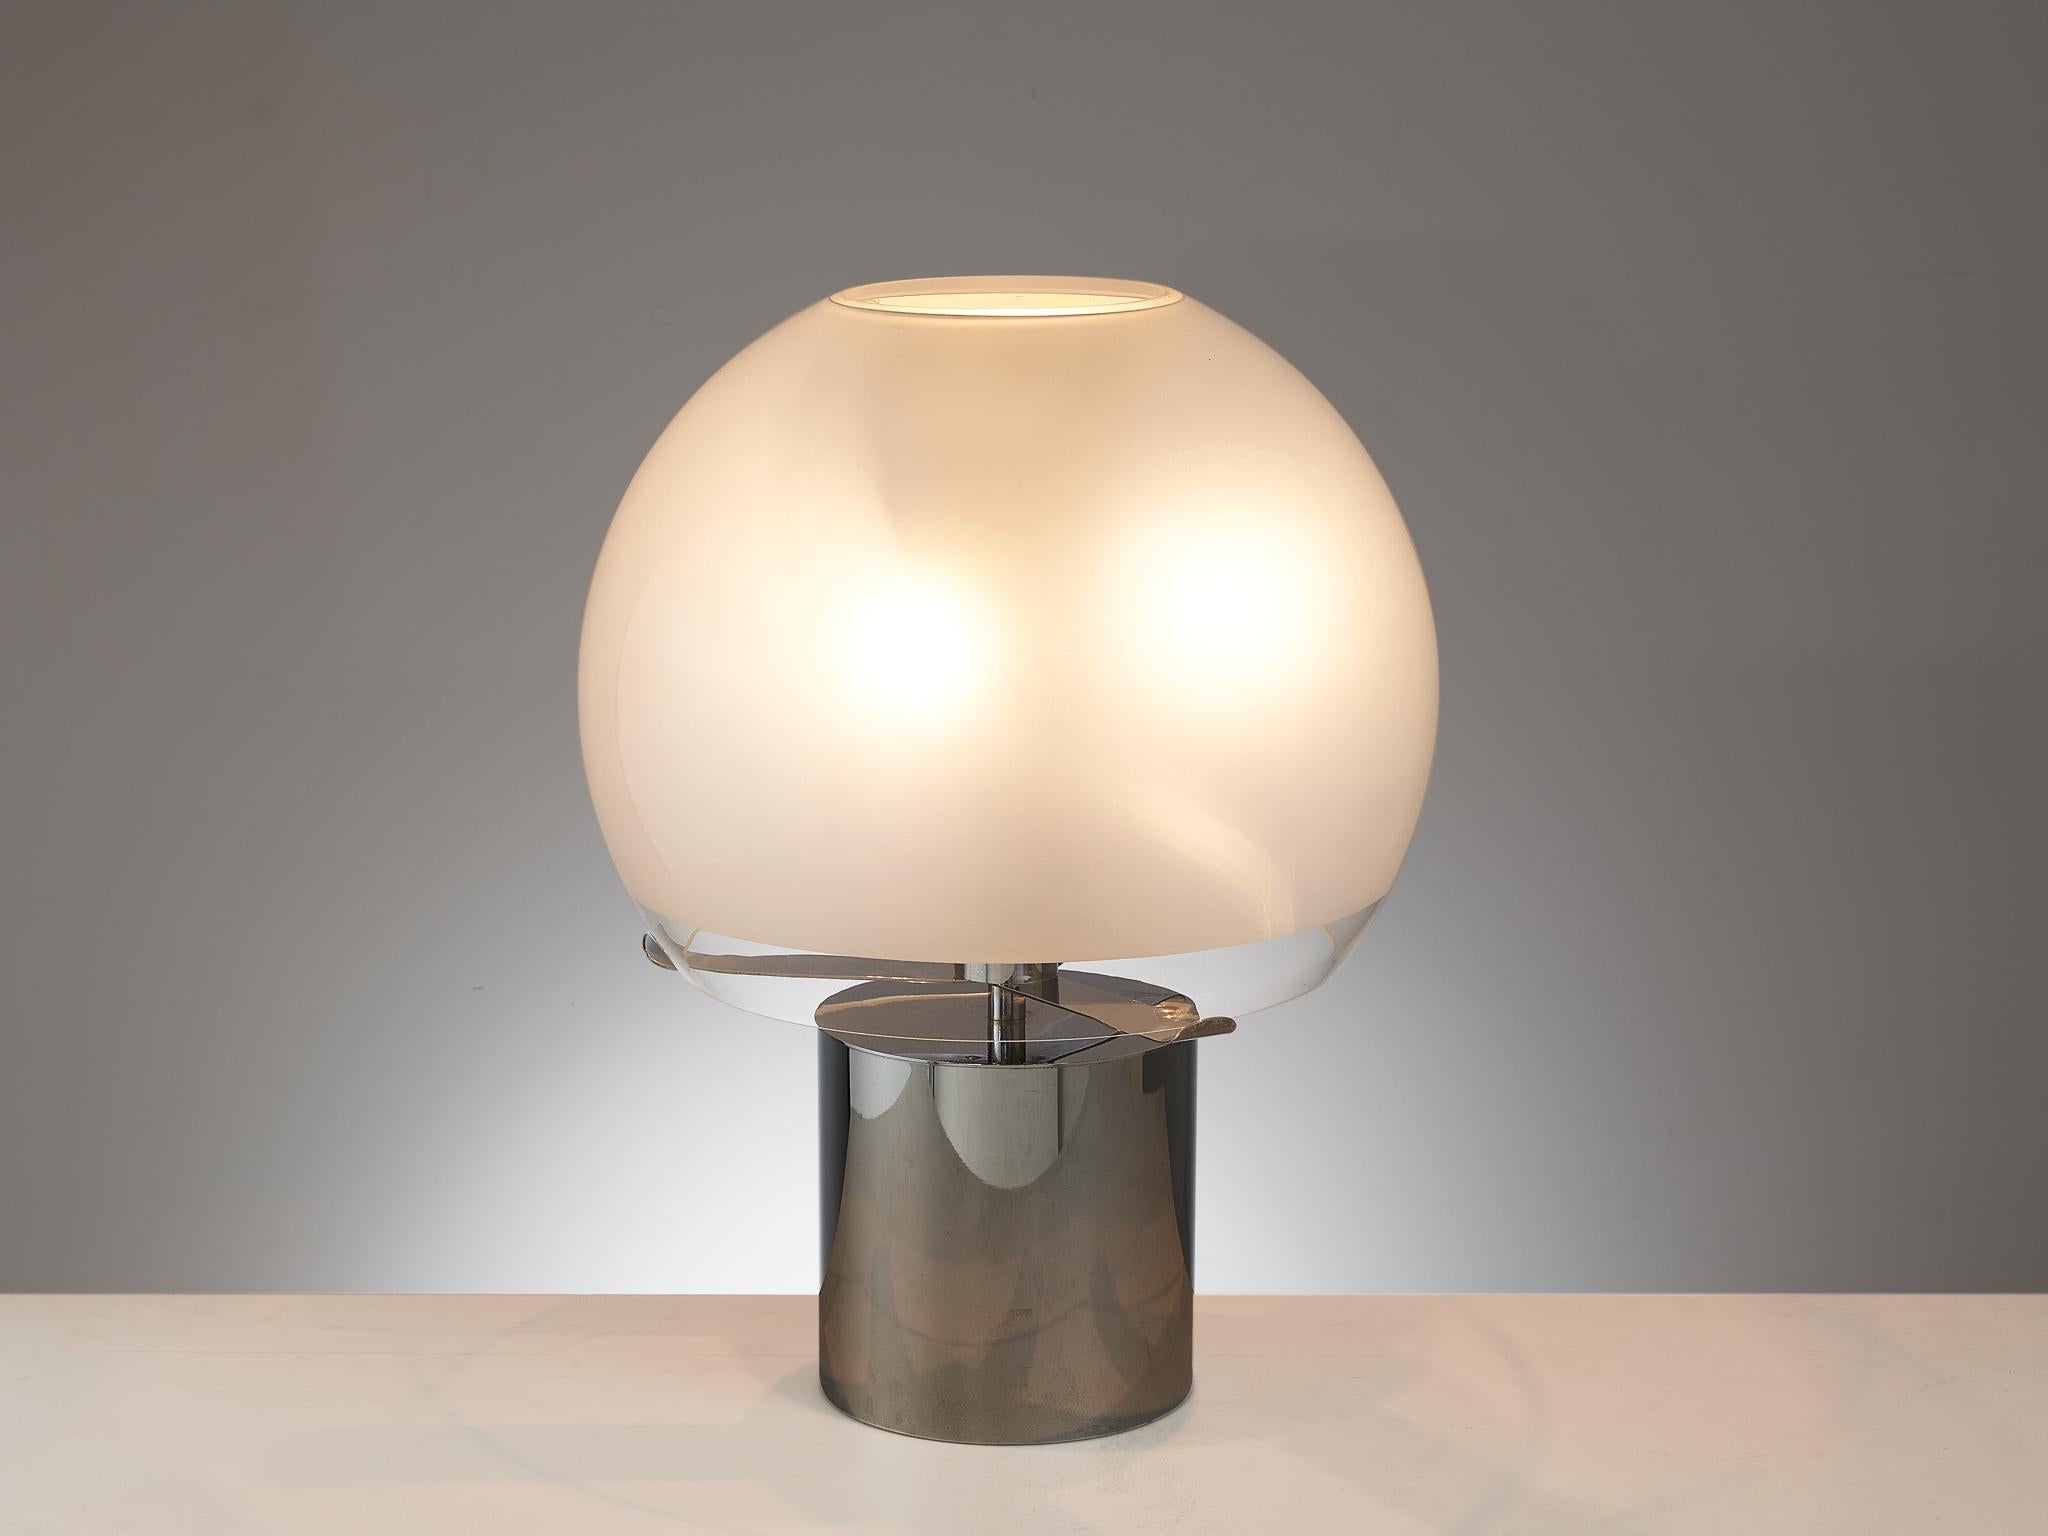 Luigi Caccia Dominioni for Azucena, table lamp, model Porcino, steel, chrome, frosted glass, Italy, 1966. 

Futuristic spherical lamp designed by Italian designer Luigi Caccia Dominioni for Azucena. Its design is reminiscent to the designs typical